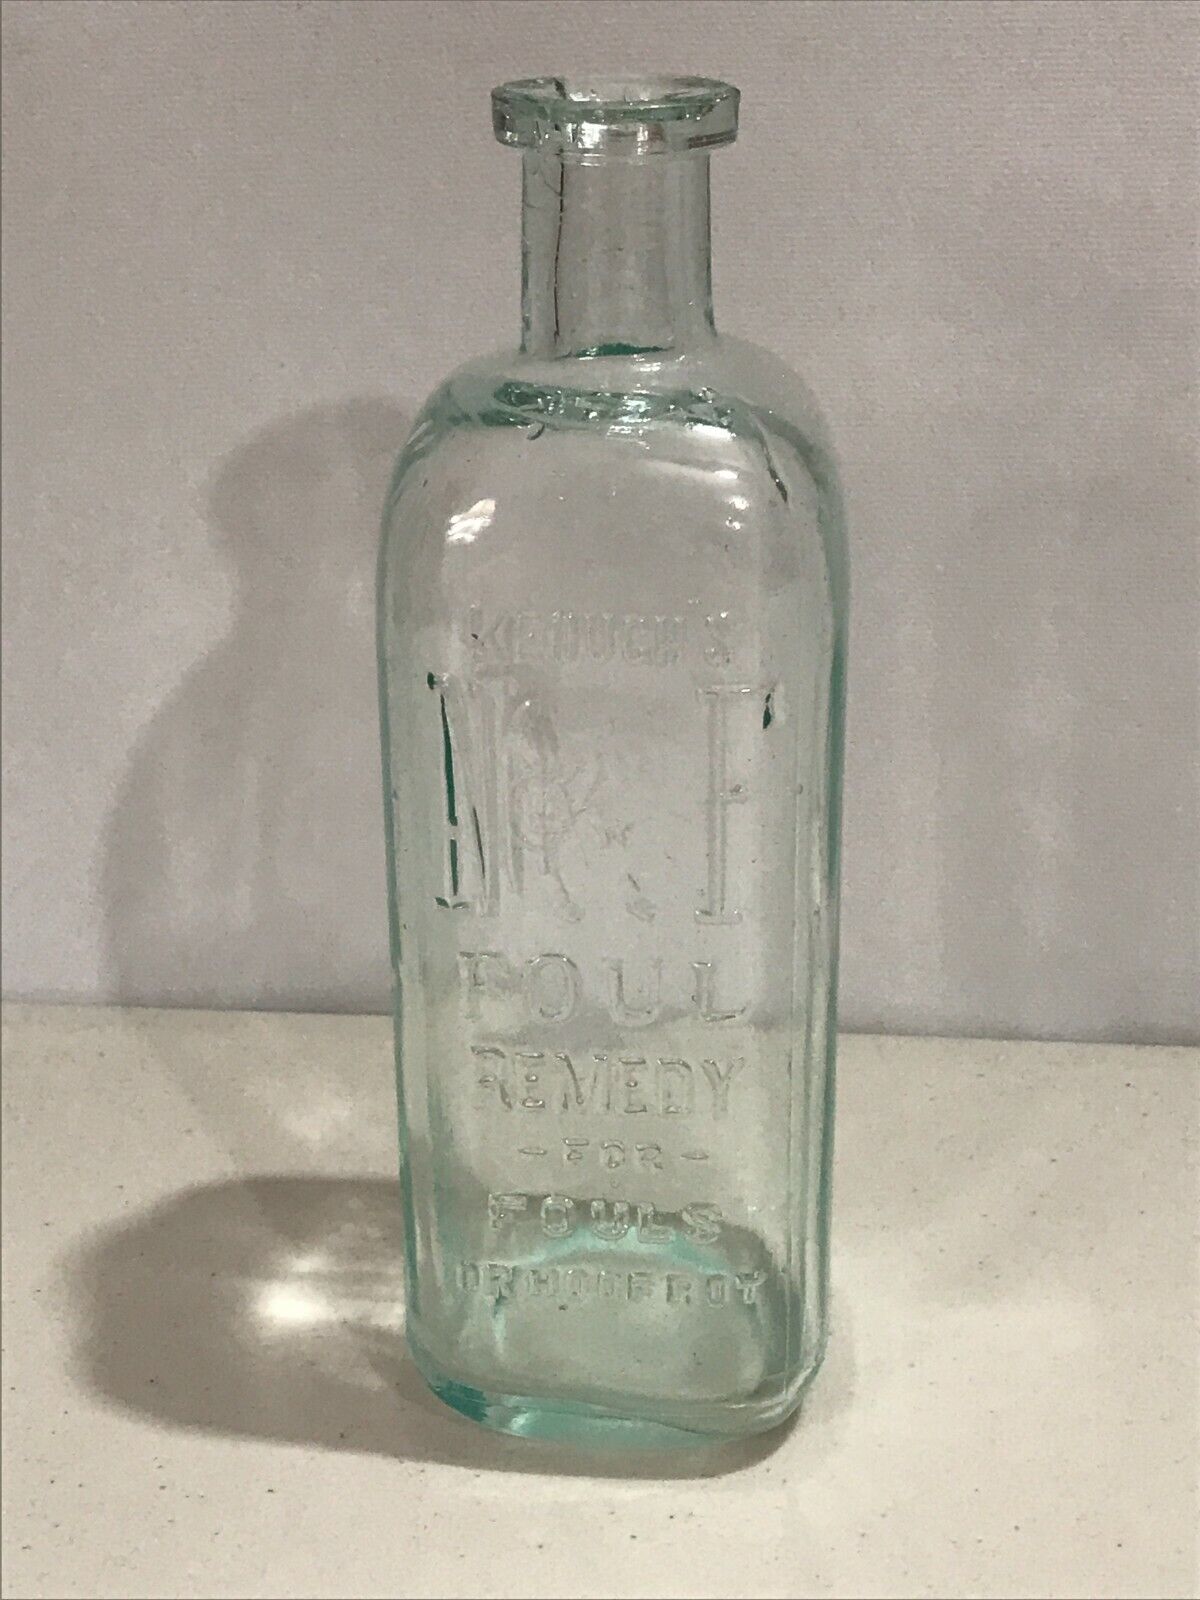 Vintage Antique Glass Bottle Keough's Foul Remedy For Fouls Or Hoof Rot